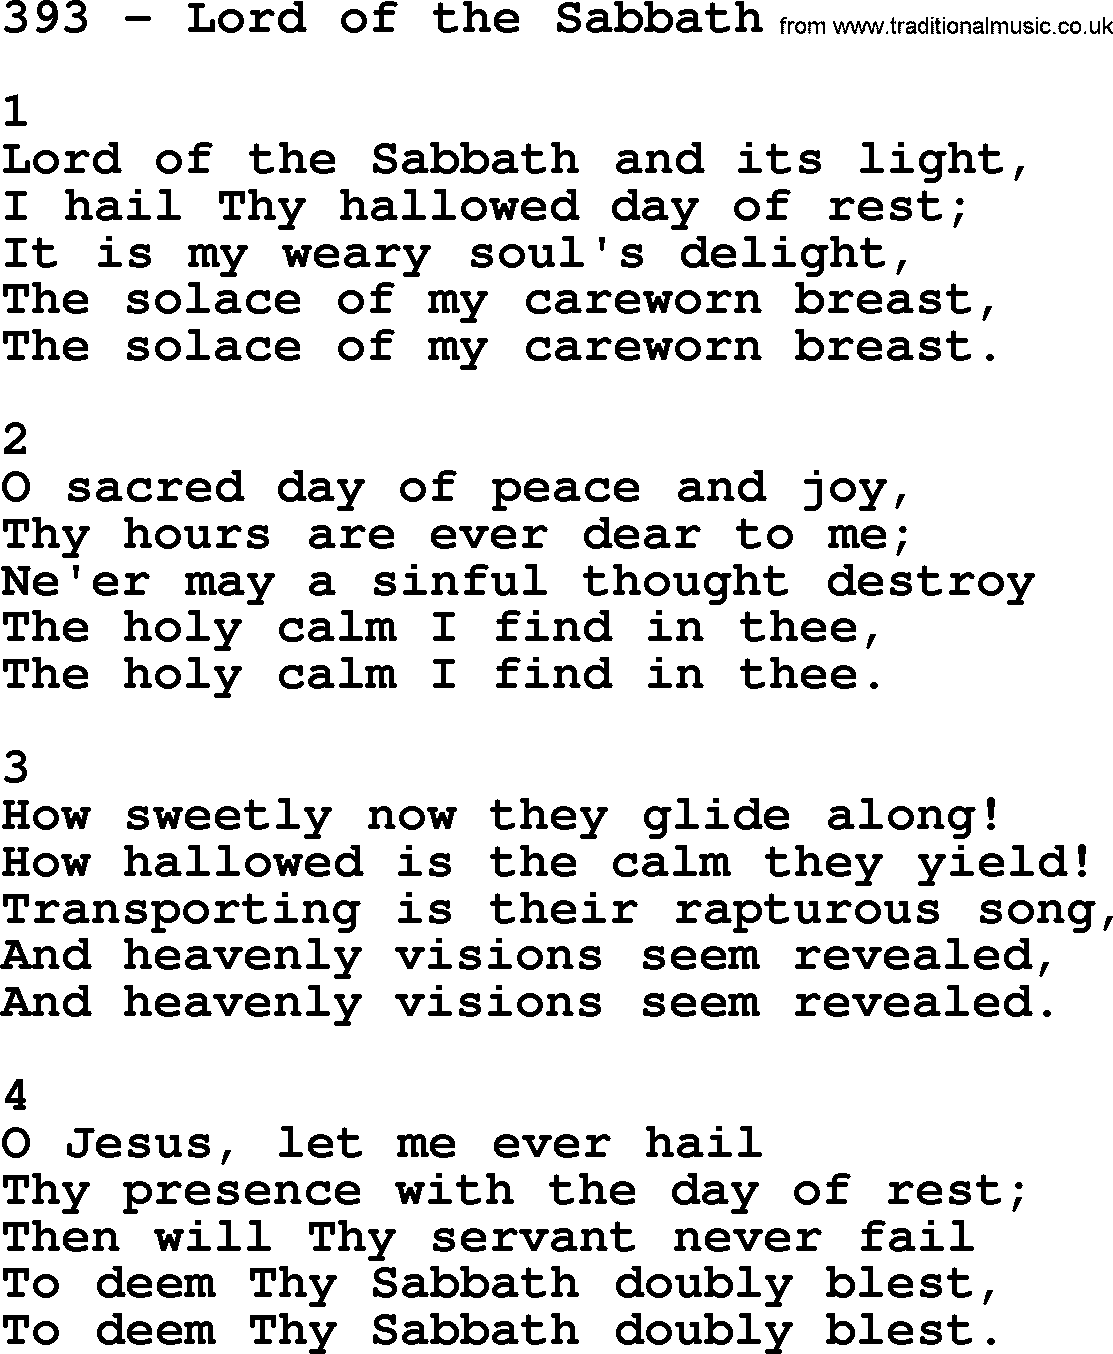 Complete Adventis Hymnal, title: 393-Lord Of The Sabbath, with lyrics, midi, mp3, powerpoints(PPT) and PDF,